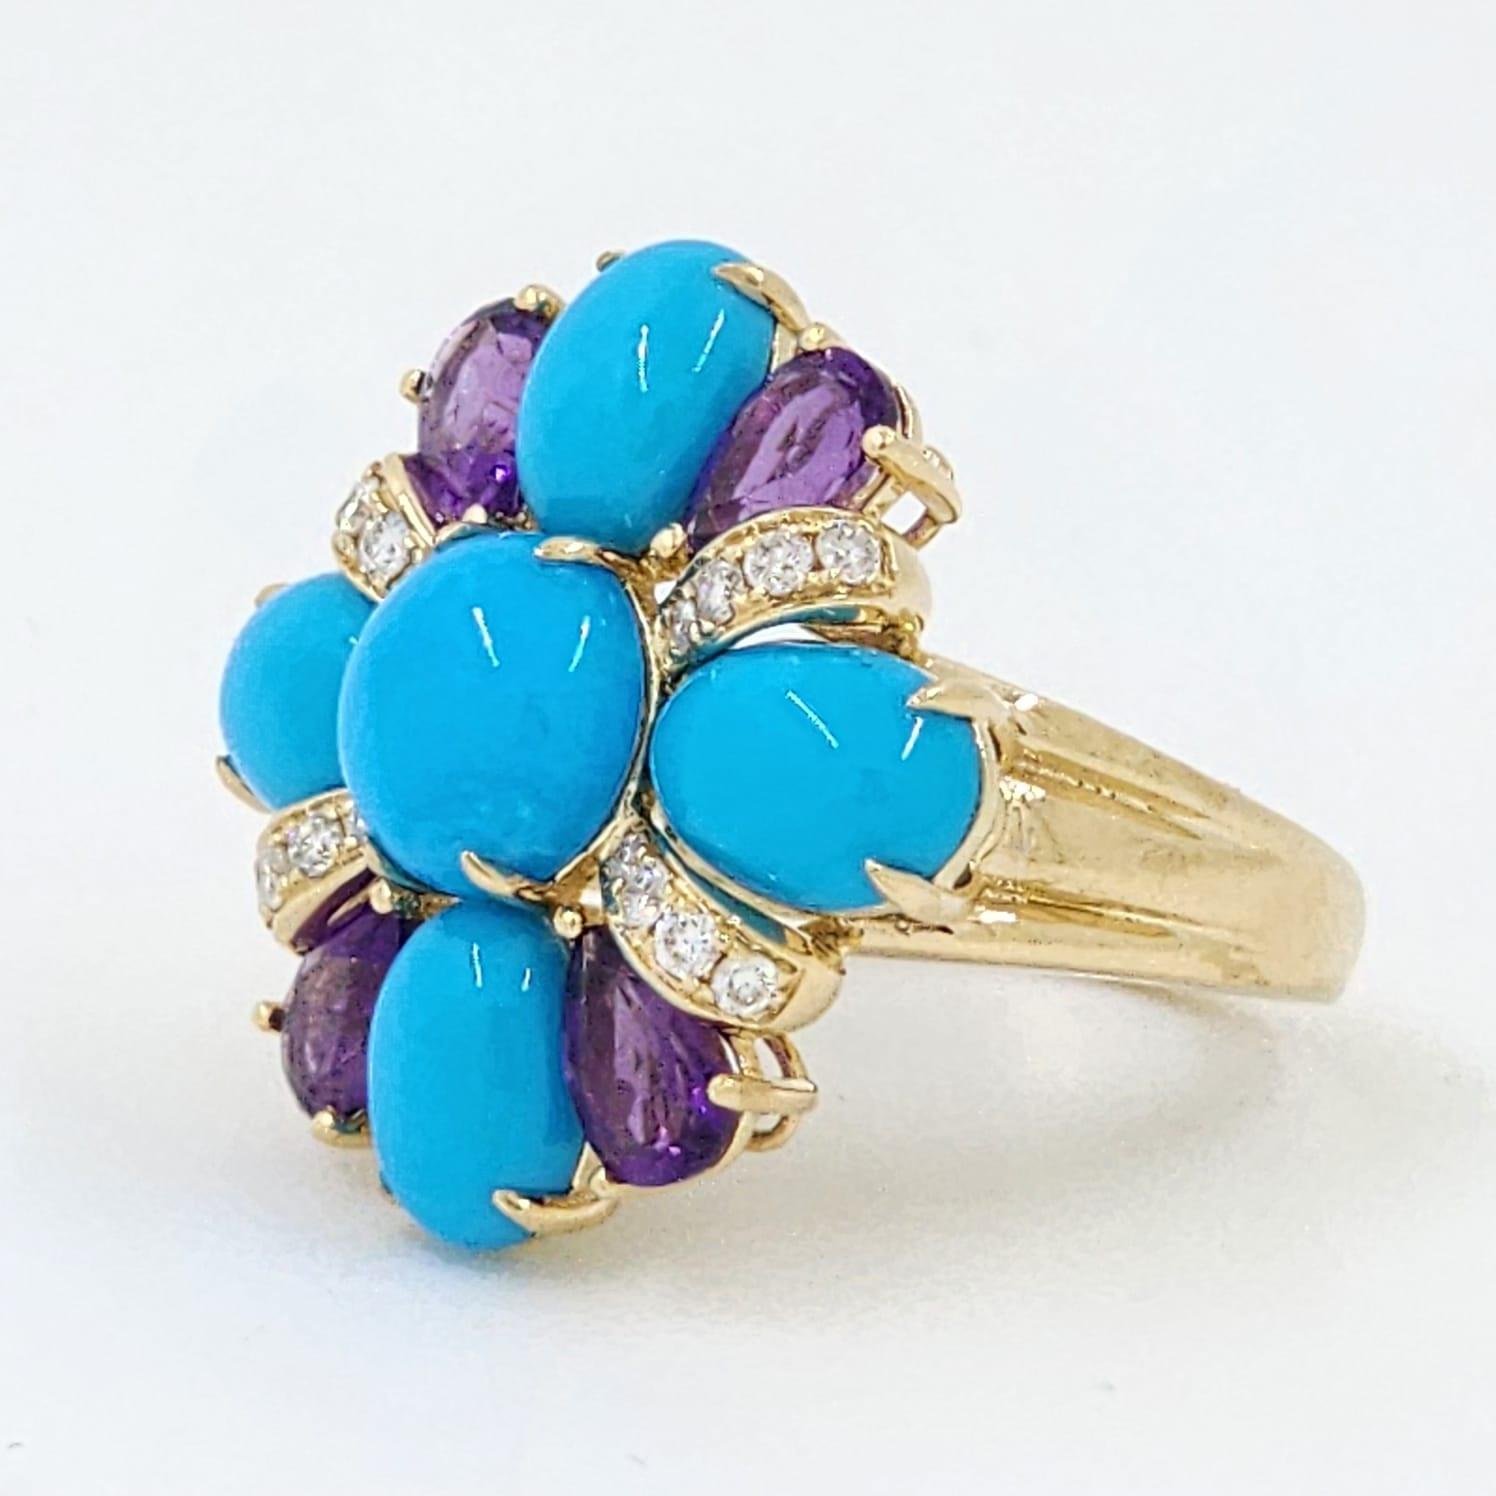 Cabochon Vintage Sleeping Beauty Turquoise Amethyst and Diamond Ring in 14 Karat Gold For Sale